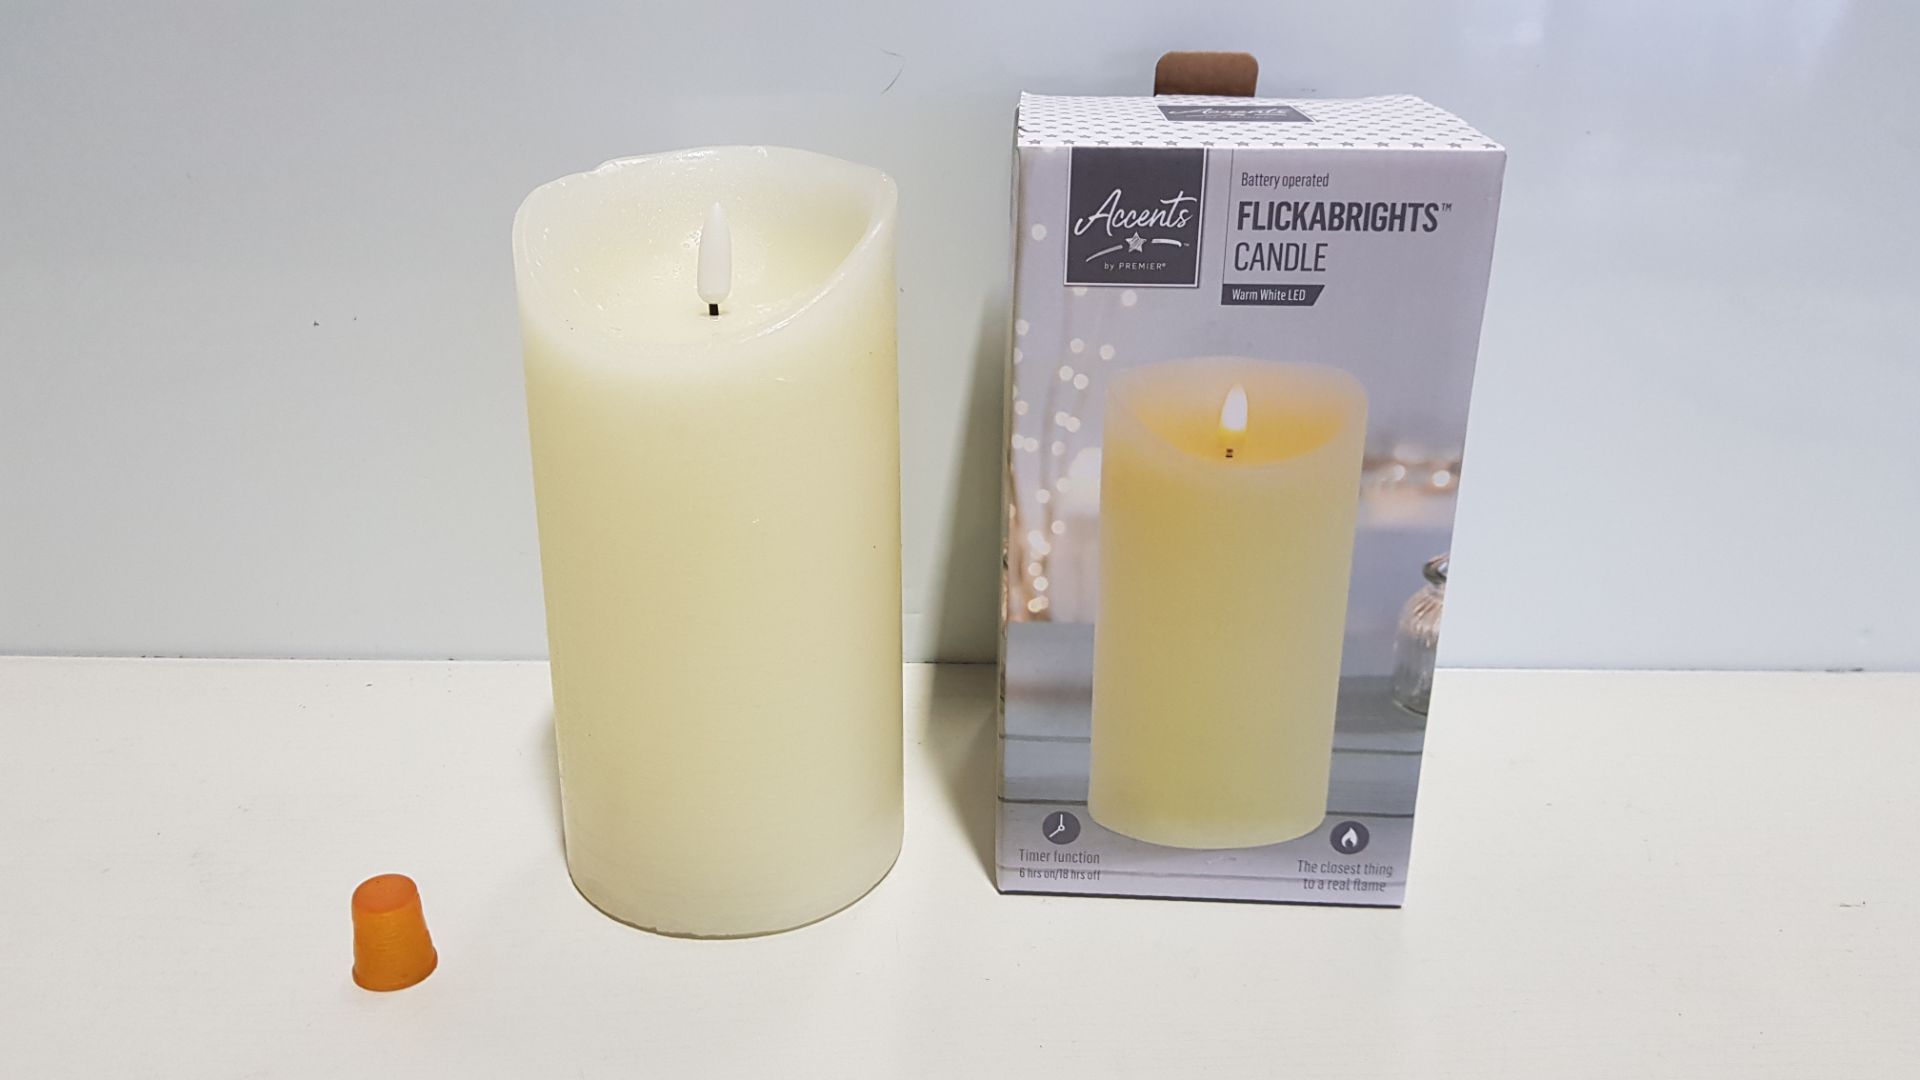 60 X BRAND NEW PREMIER FLICKABRIGHTS CANDLE WTH WARM WHITE LED ( BATTERY OPERATED ) - WITH TIMER